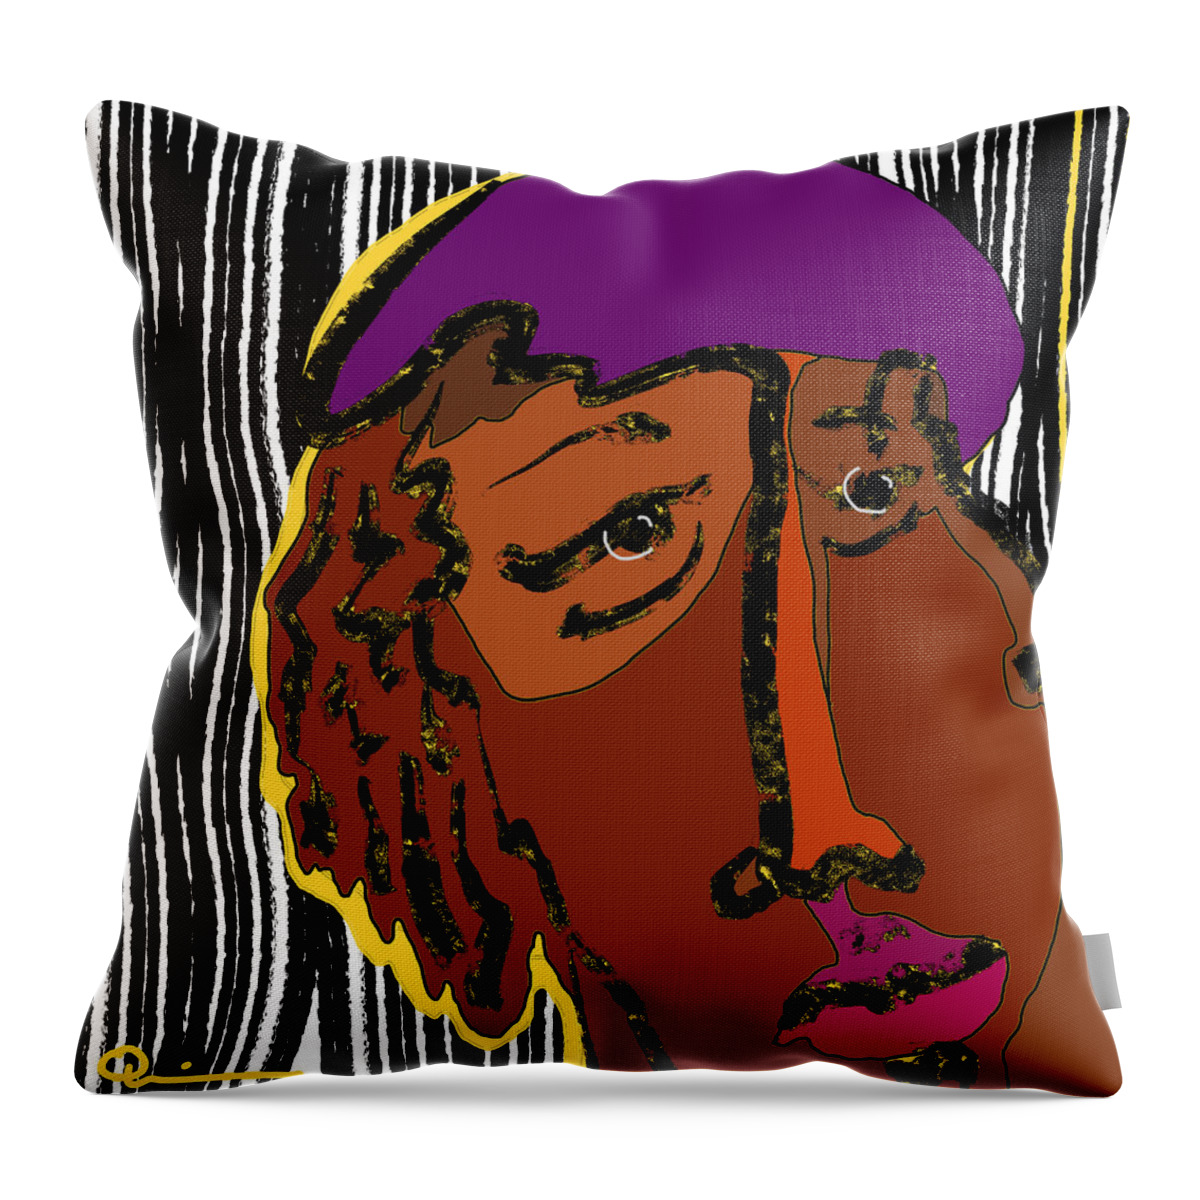 Quiros Throw Pillow featuring the digital art Beret 3 by Jeffrey Quiros